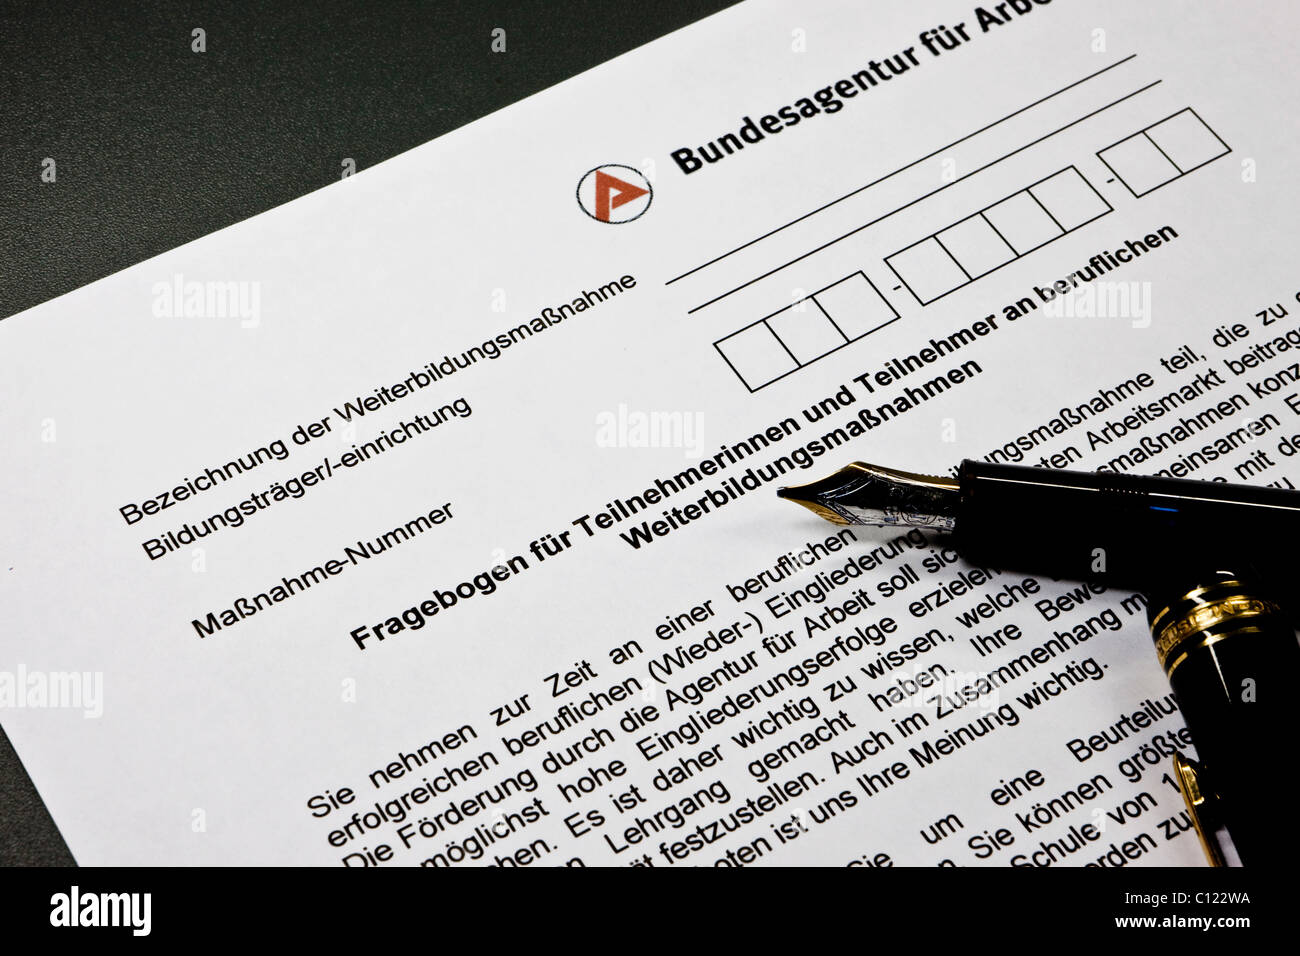 Questionnaire for submission to the Bundesagentur fuer Arbeit, German Federal Employment Agency, questionnaire for participants Stock Photo